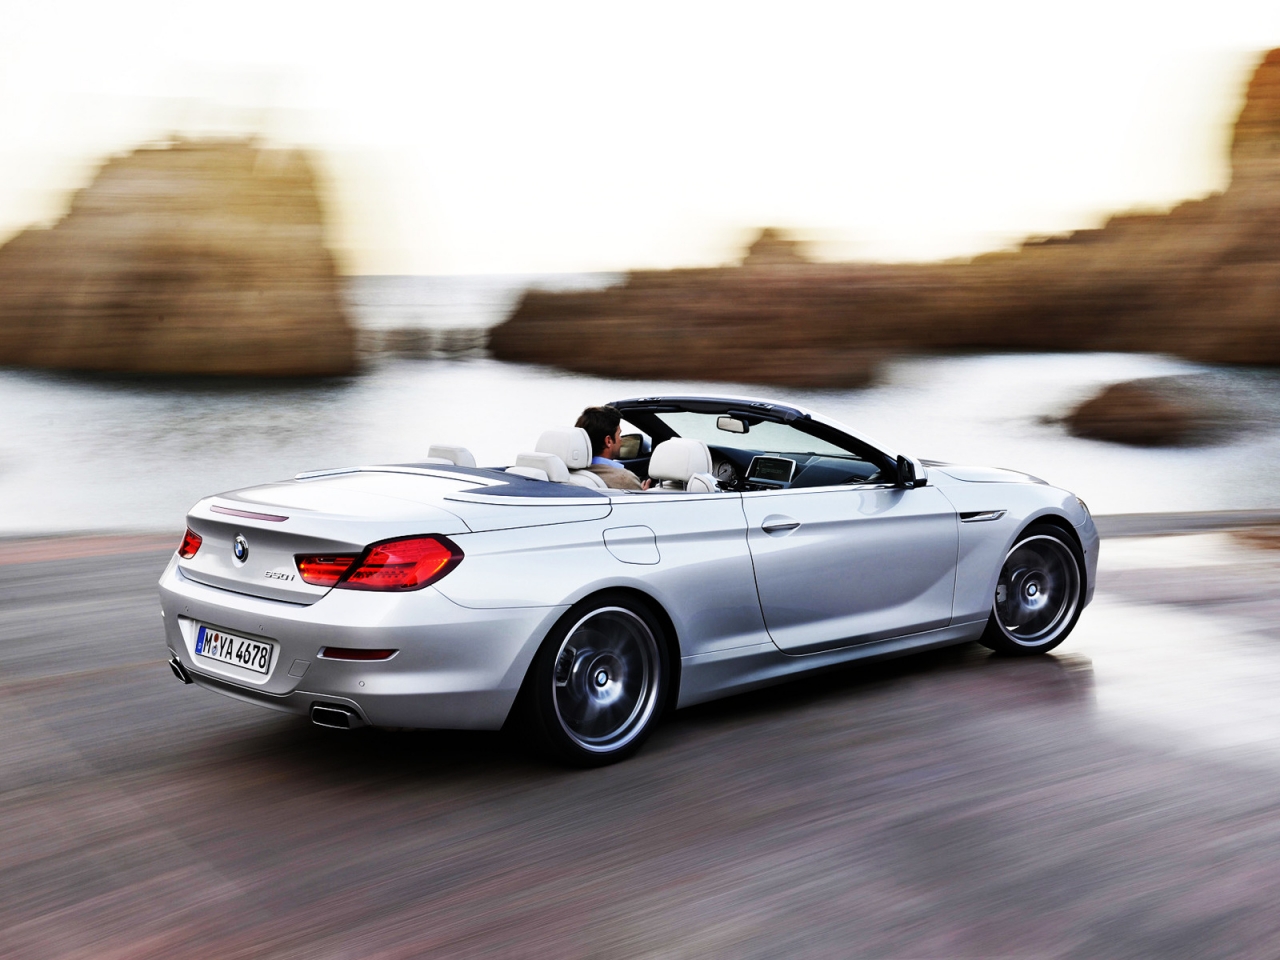 2011 BMW 6 Series Convertible for 1280 x 960 resolution